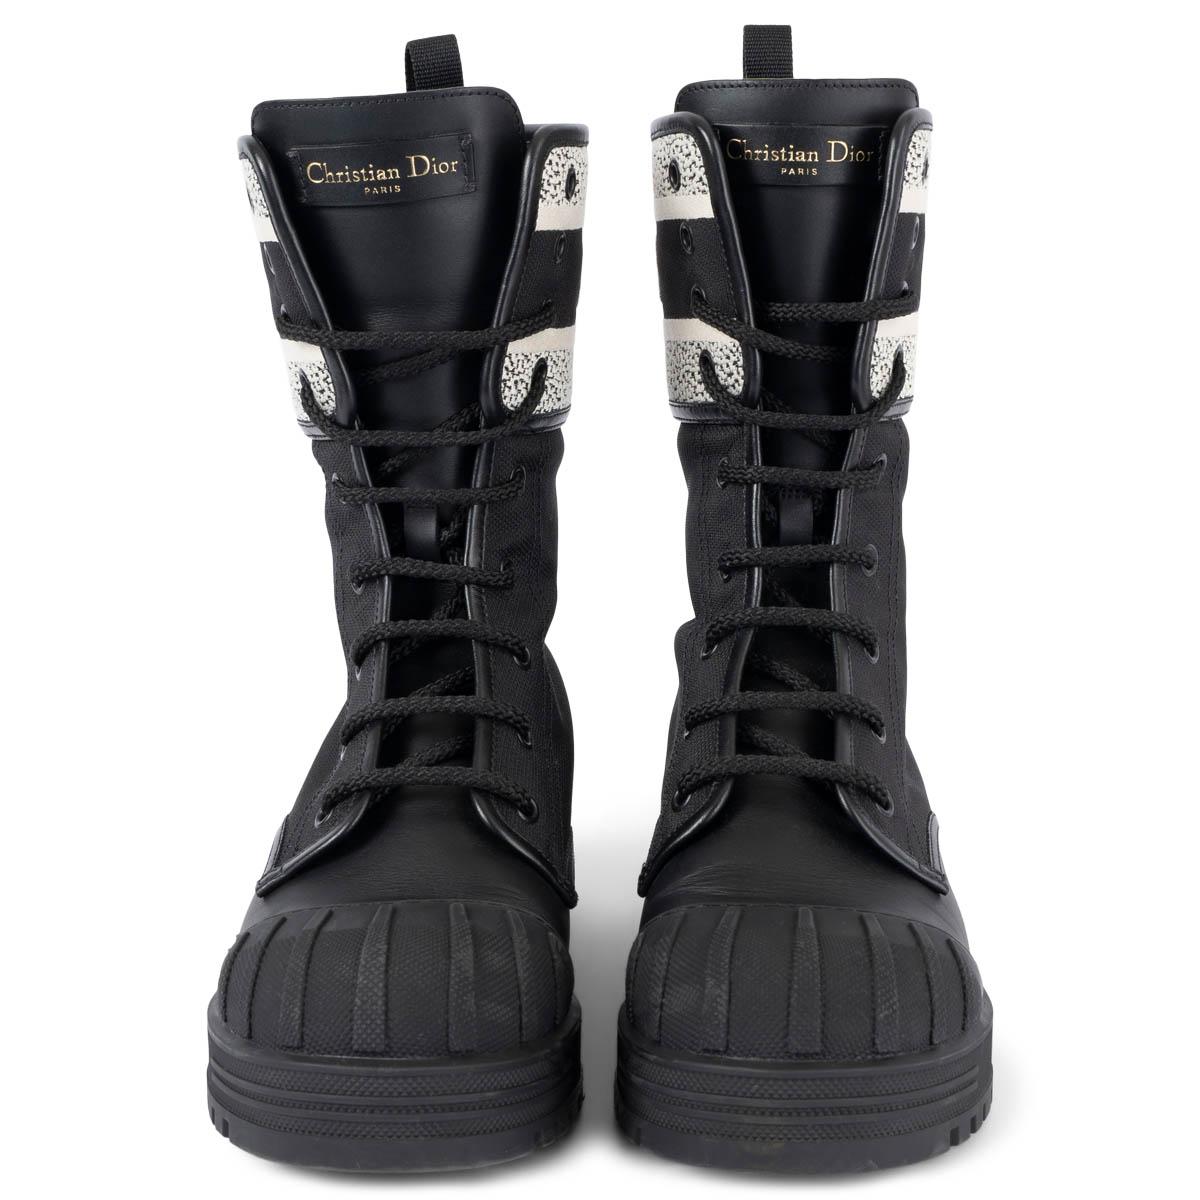 100% authentic Christian Dior D-Major laced-up ankle-boots in black technical fabric and calfskin. Embellished with a white Christian Dior embroidered band, inspired by the Dior Book Tote. The heel, round toe and thick notched rubber sole complete